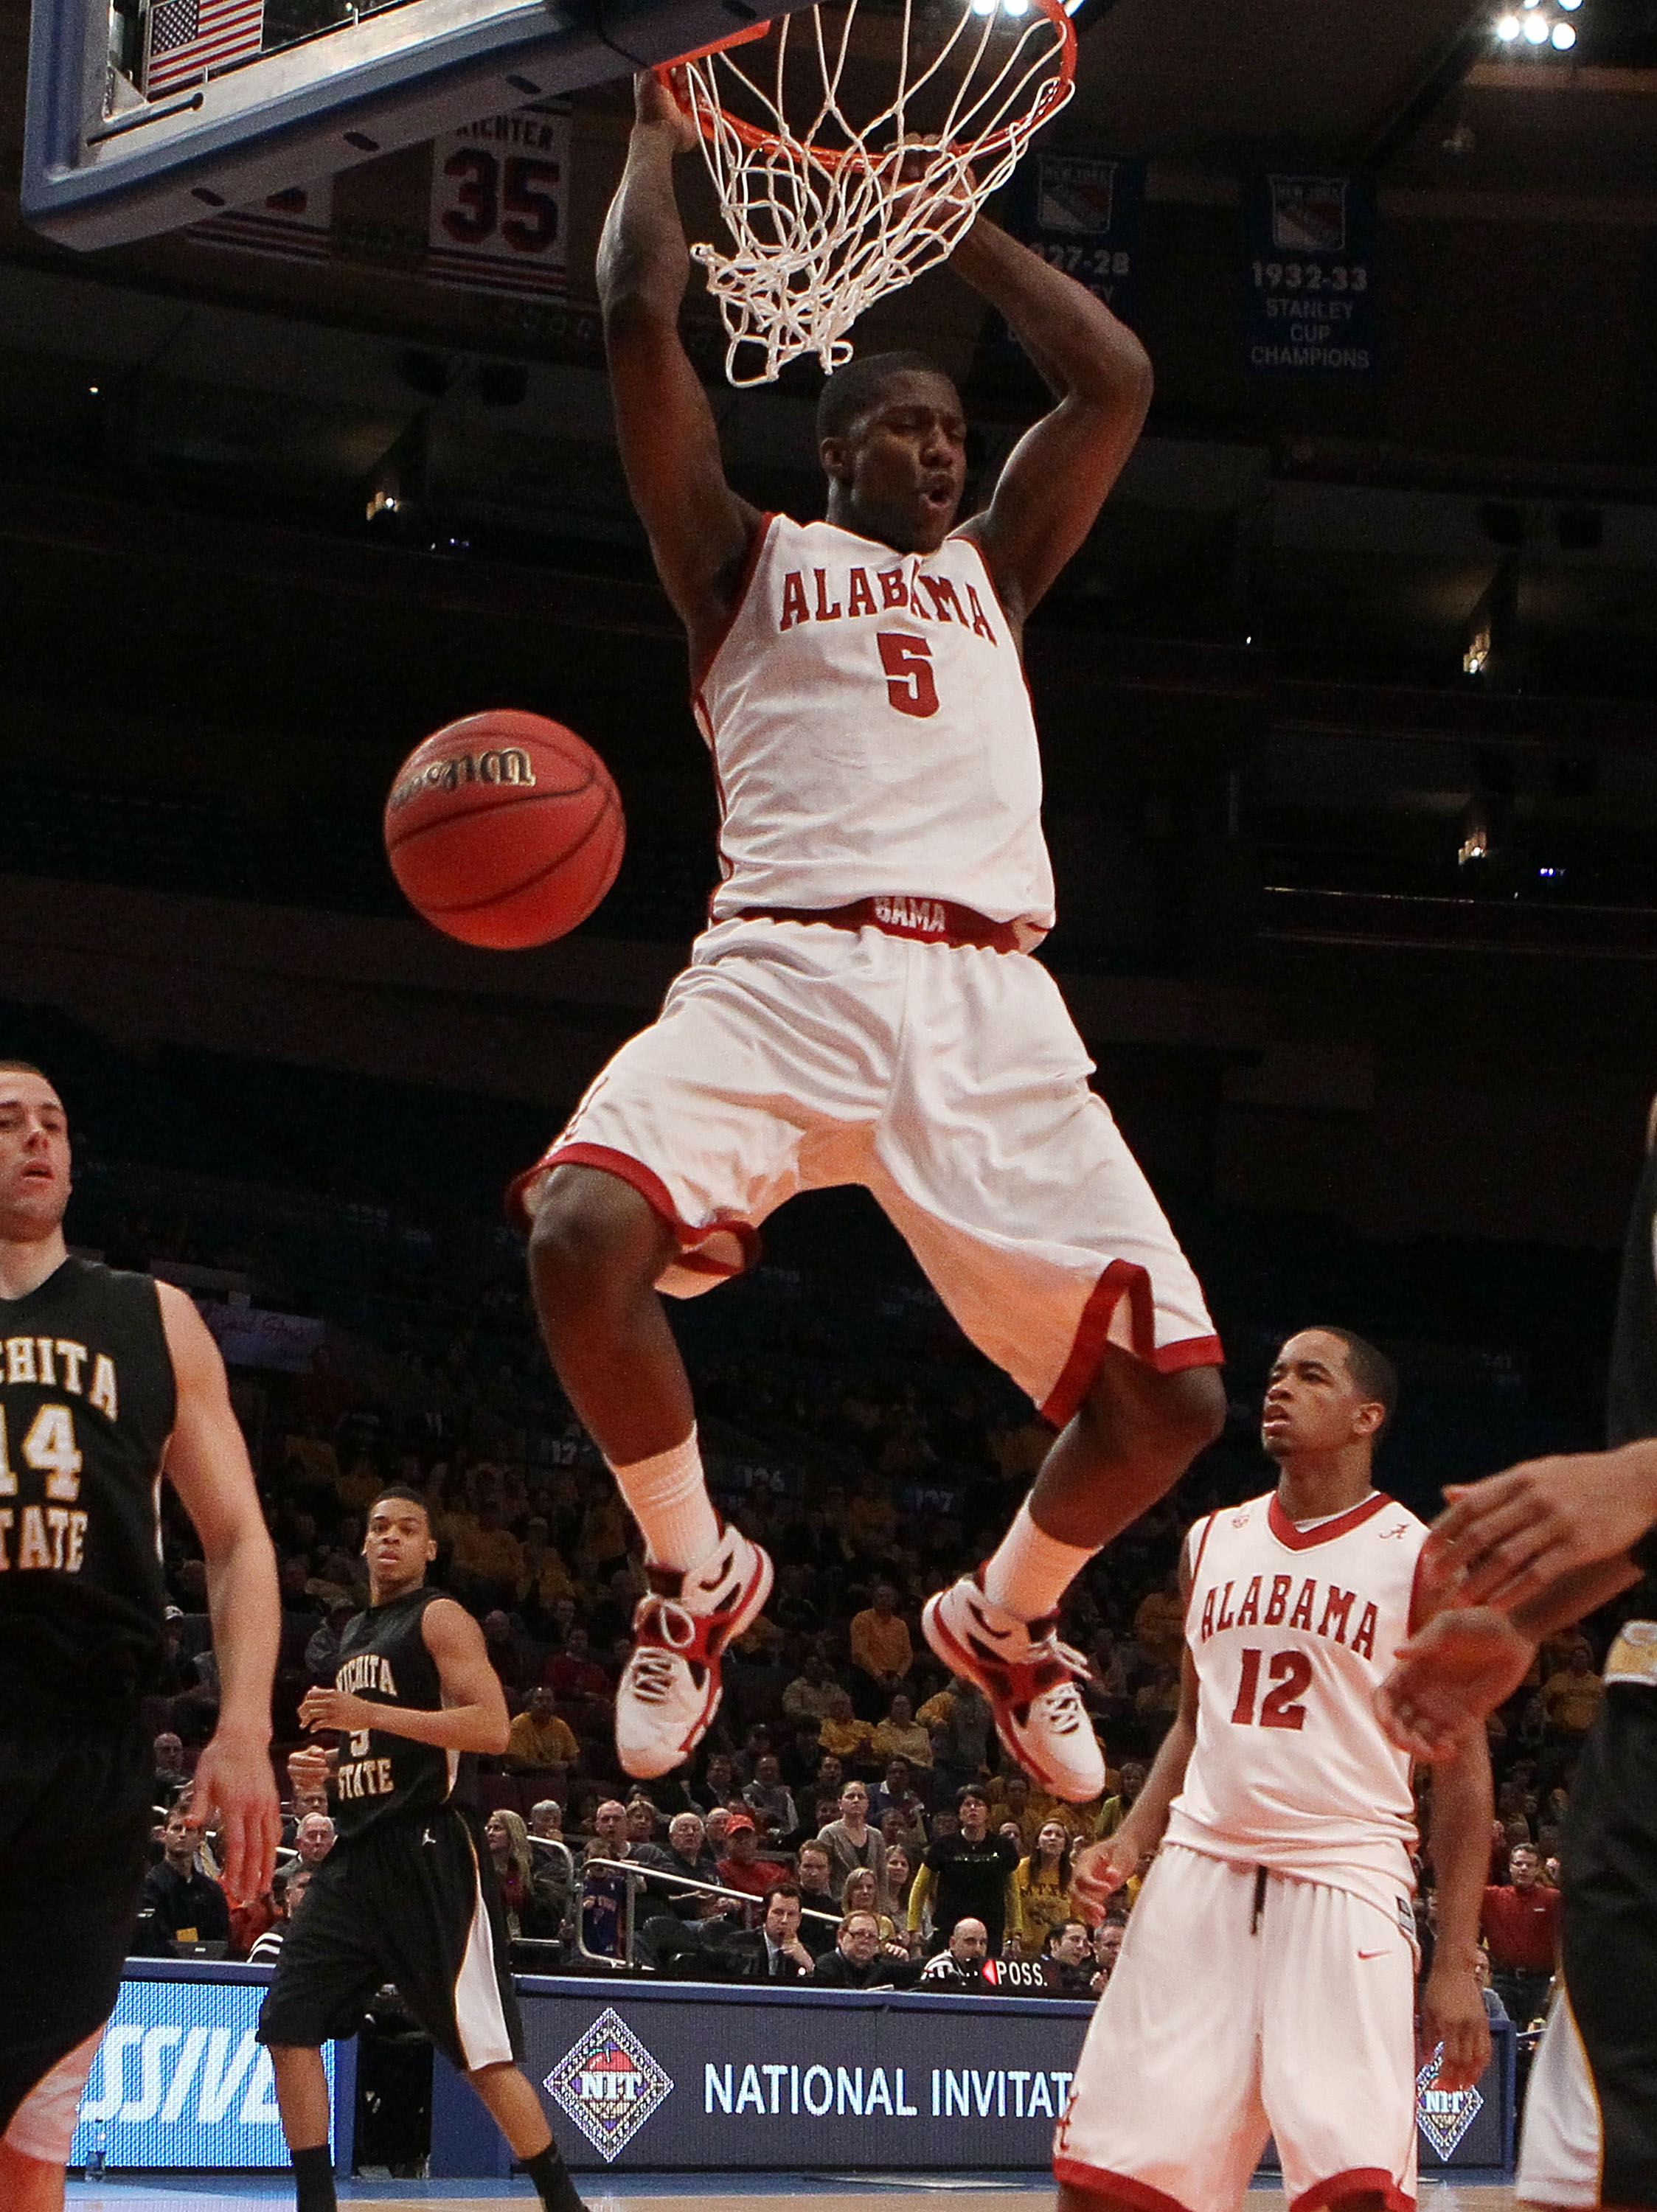 NEW YORK, NY - MARCH 31: Tony Mitchell #5 of the Alabama Crimson Tide dunks against the Wichita State Shockers during the 2011 NIT Championship game on March 31, 2011 at Madison Square Garden in New York City. Wichita State defeated Alabama 66-57.  (Photo